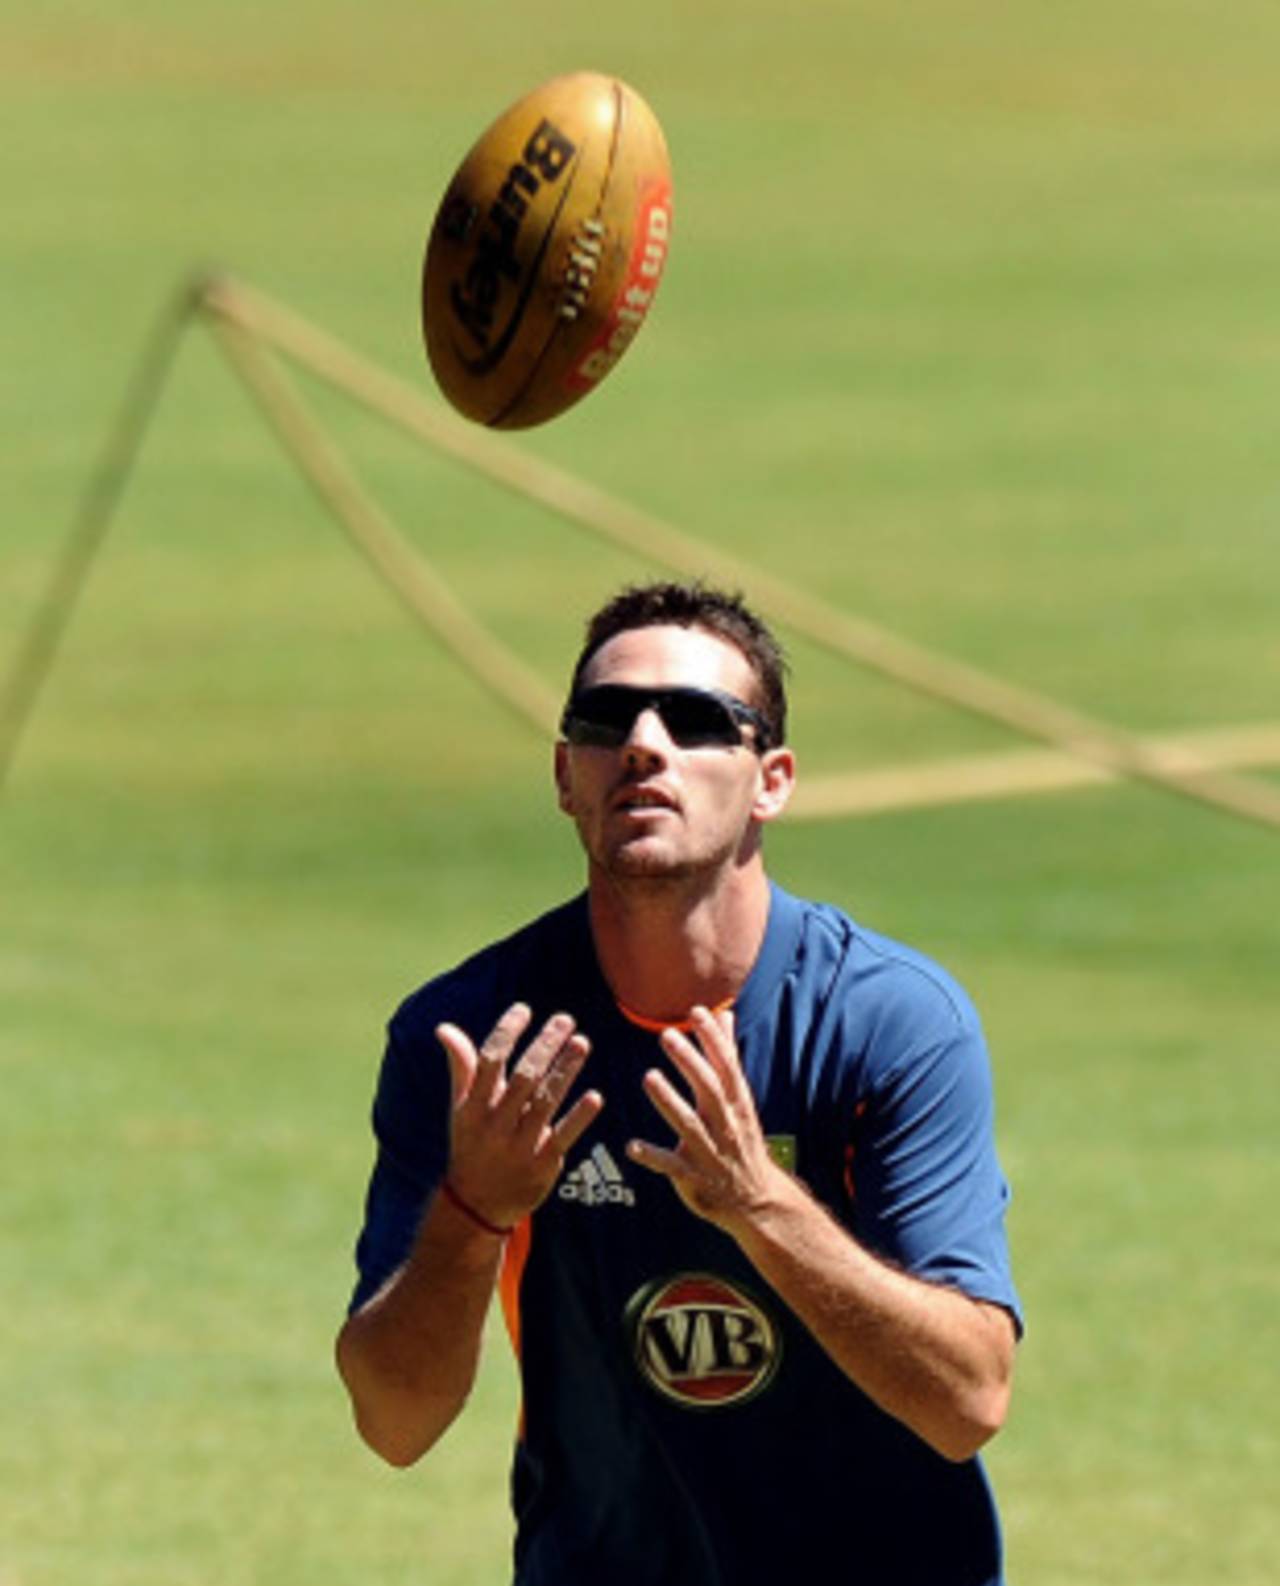 Shaun Tait catches a rugby ball at Australia's training session, Bangalore, February 11, 2011